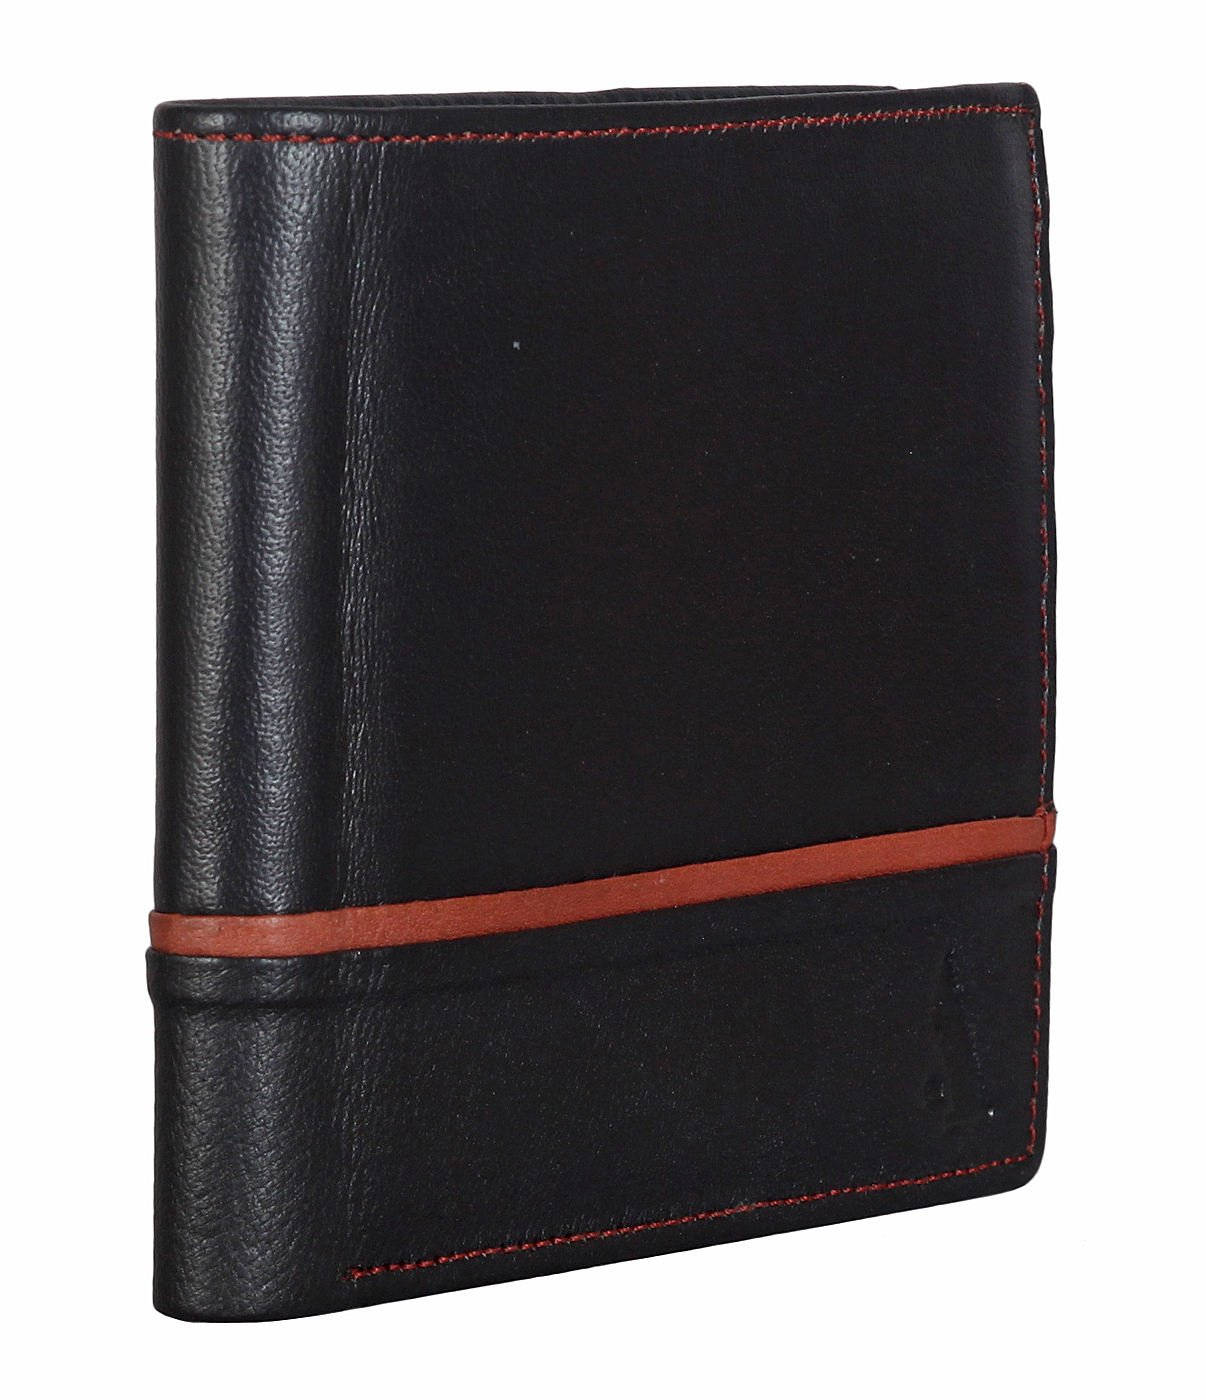 W300-Simone-Men's bifold wallet with coin pocket in Genuine Leather - Black